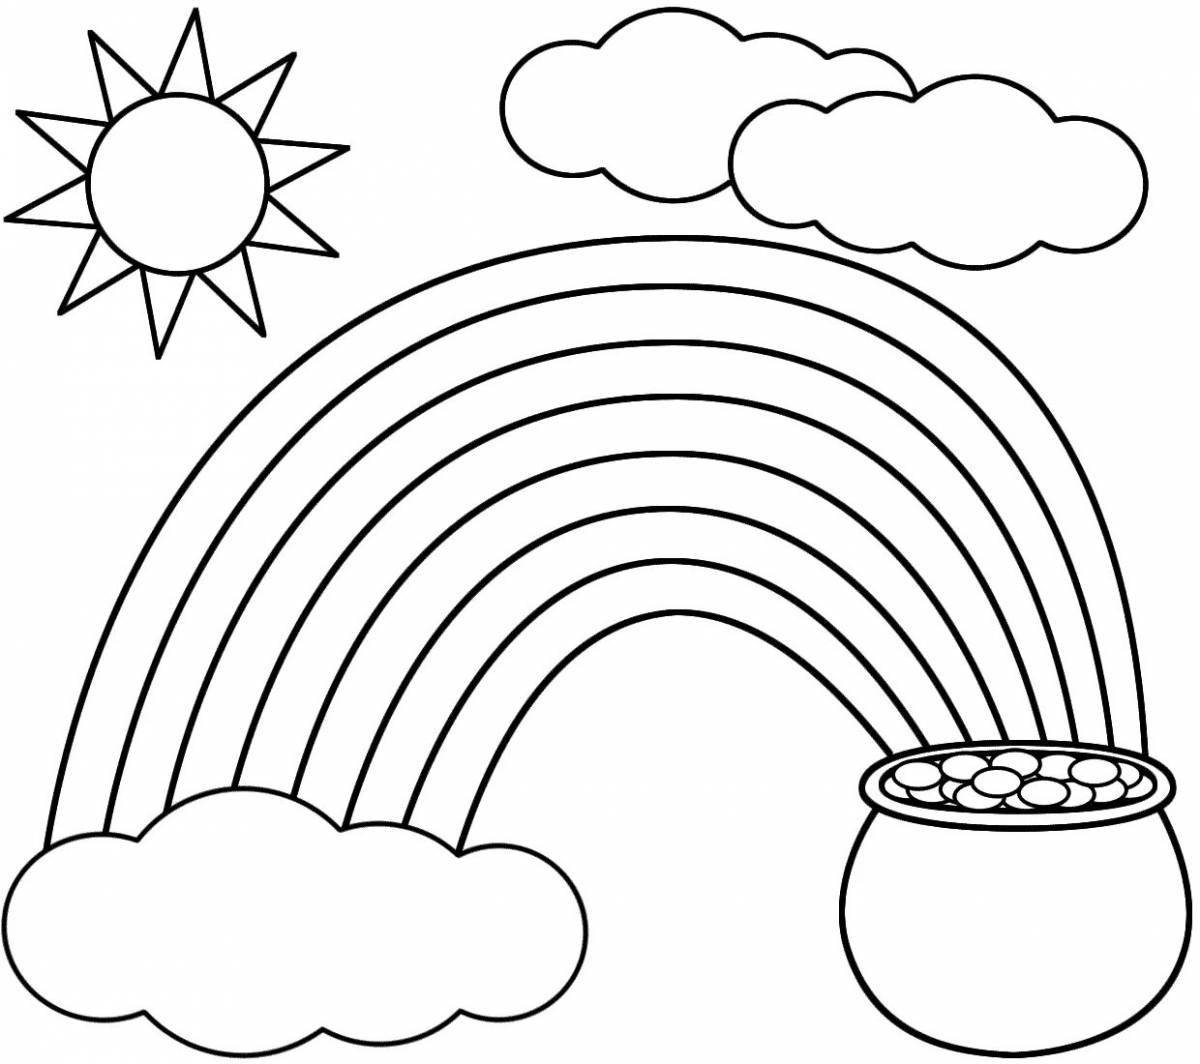 Dynamic rainbow coloring page